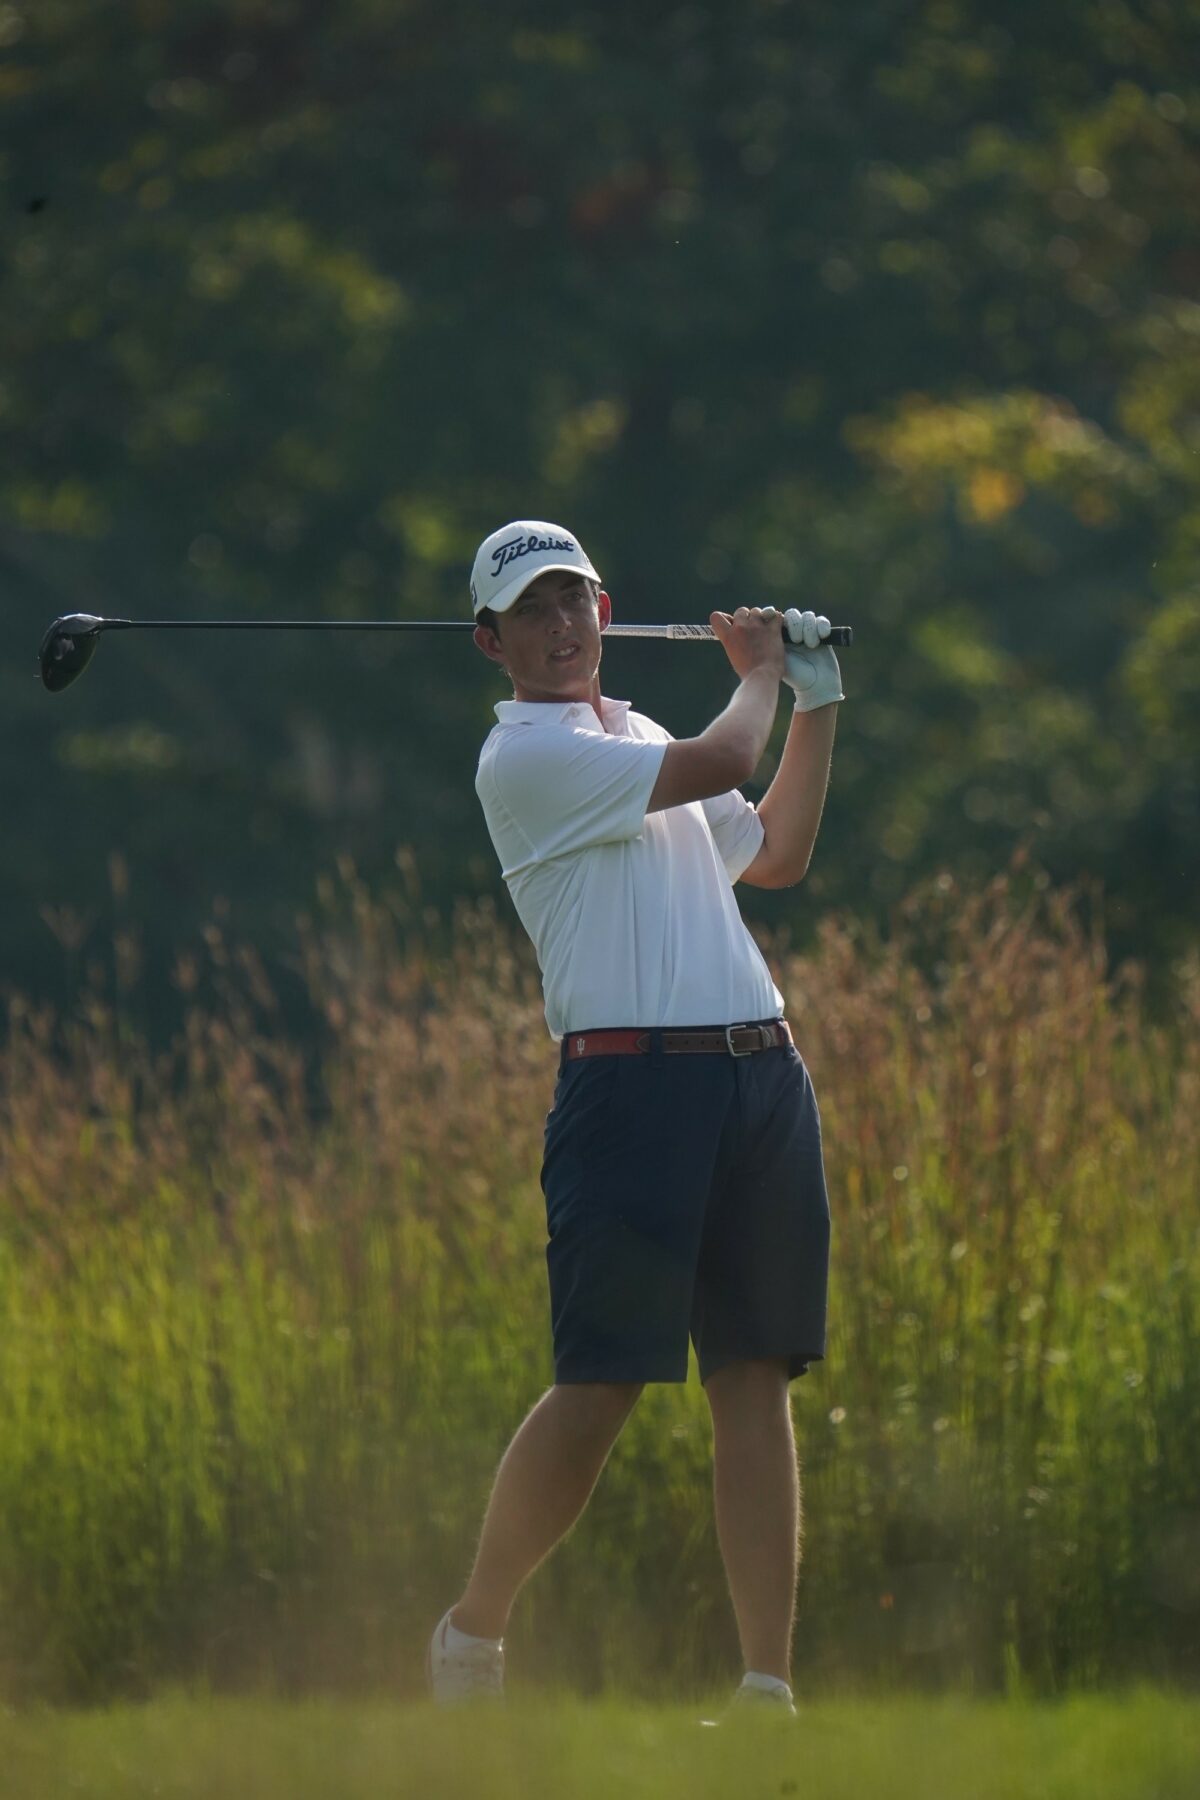 Nick Piesen’s competitive debut at the Pfau Course results in Hoosier Am title